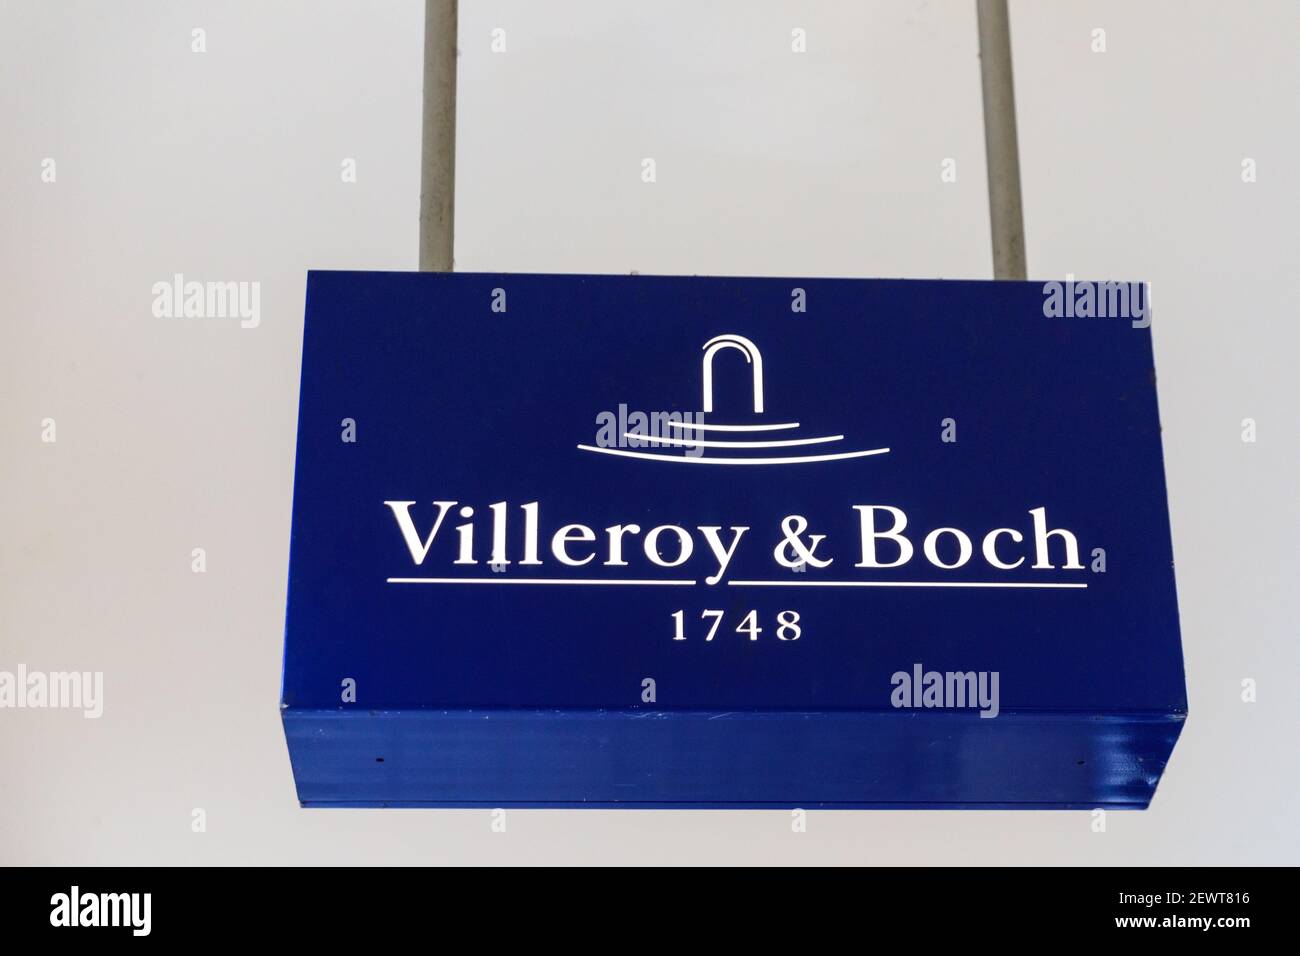 Villeroy & Boch, shop sign and corporate brand logo of porcelaine and sanitary ware manufacturer, Germany Stock Photo